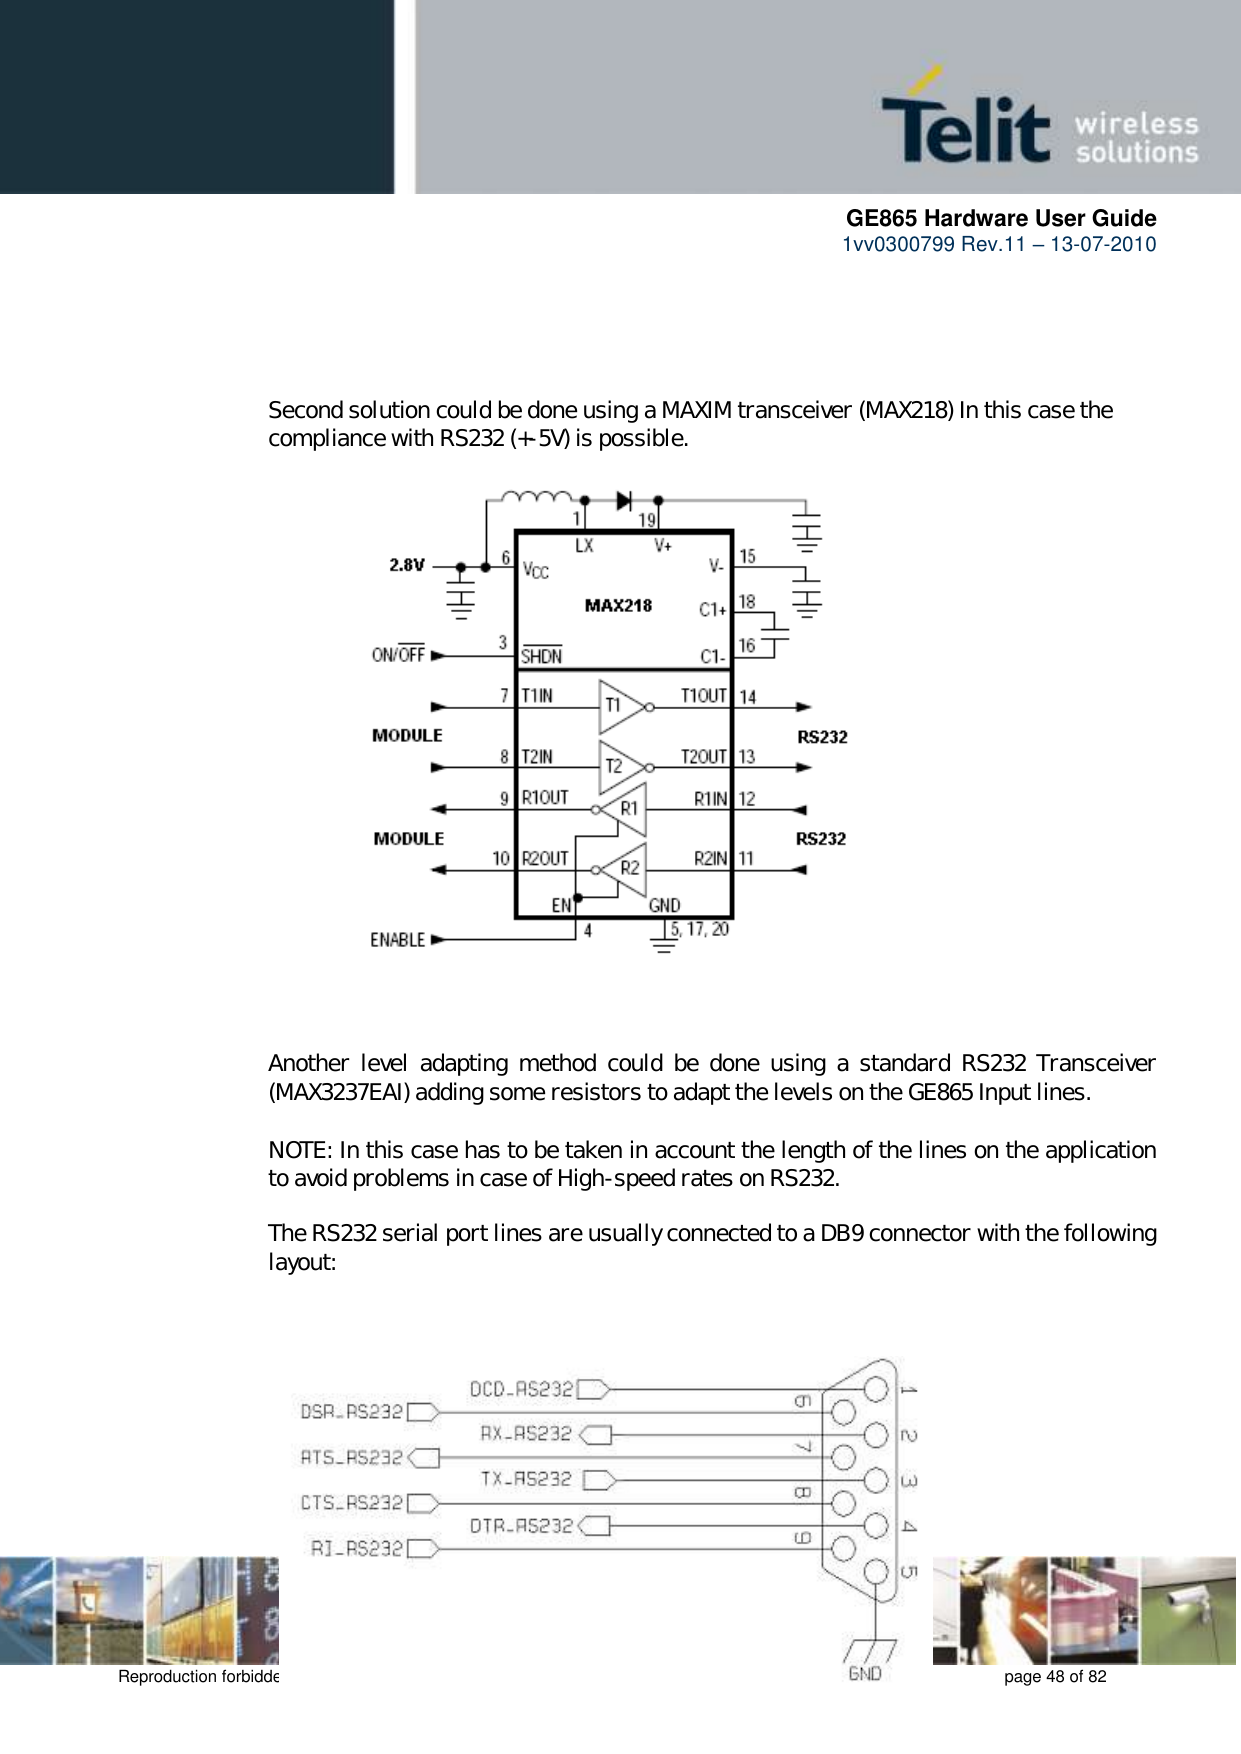      GE865 Hardware User Guide 1vv0300799 Rev.11 – 13-07-2010       Reproduction forbidden without Telit Communications S.p.A. written authorization - All Rights Reserved    page 48 of 82      Second solution could be done using a MAXIM transceiver (MAX218) In this case the compliance with RS232 (+-5V) is possible.                      Another  level  adapting  method  could  be  done  using  a standard RS232  Transceiver (MAX3237EAI) adding some resistors to adapt the levels on the GE865 Input lines.  NOTE: In this case has to be taken in account the length of the lines on the application to avoid problems in case of High-speed rates on RS232.  The RS232 serial port lines are usually connected to a DB9 connector with the following layout:    